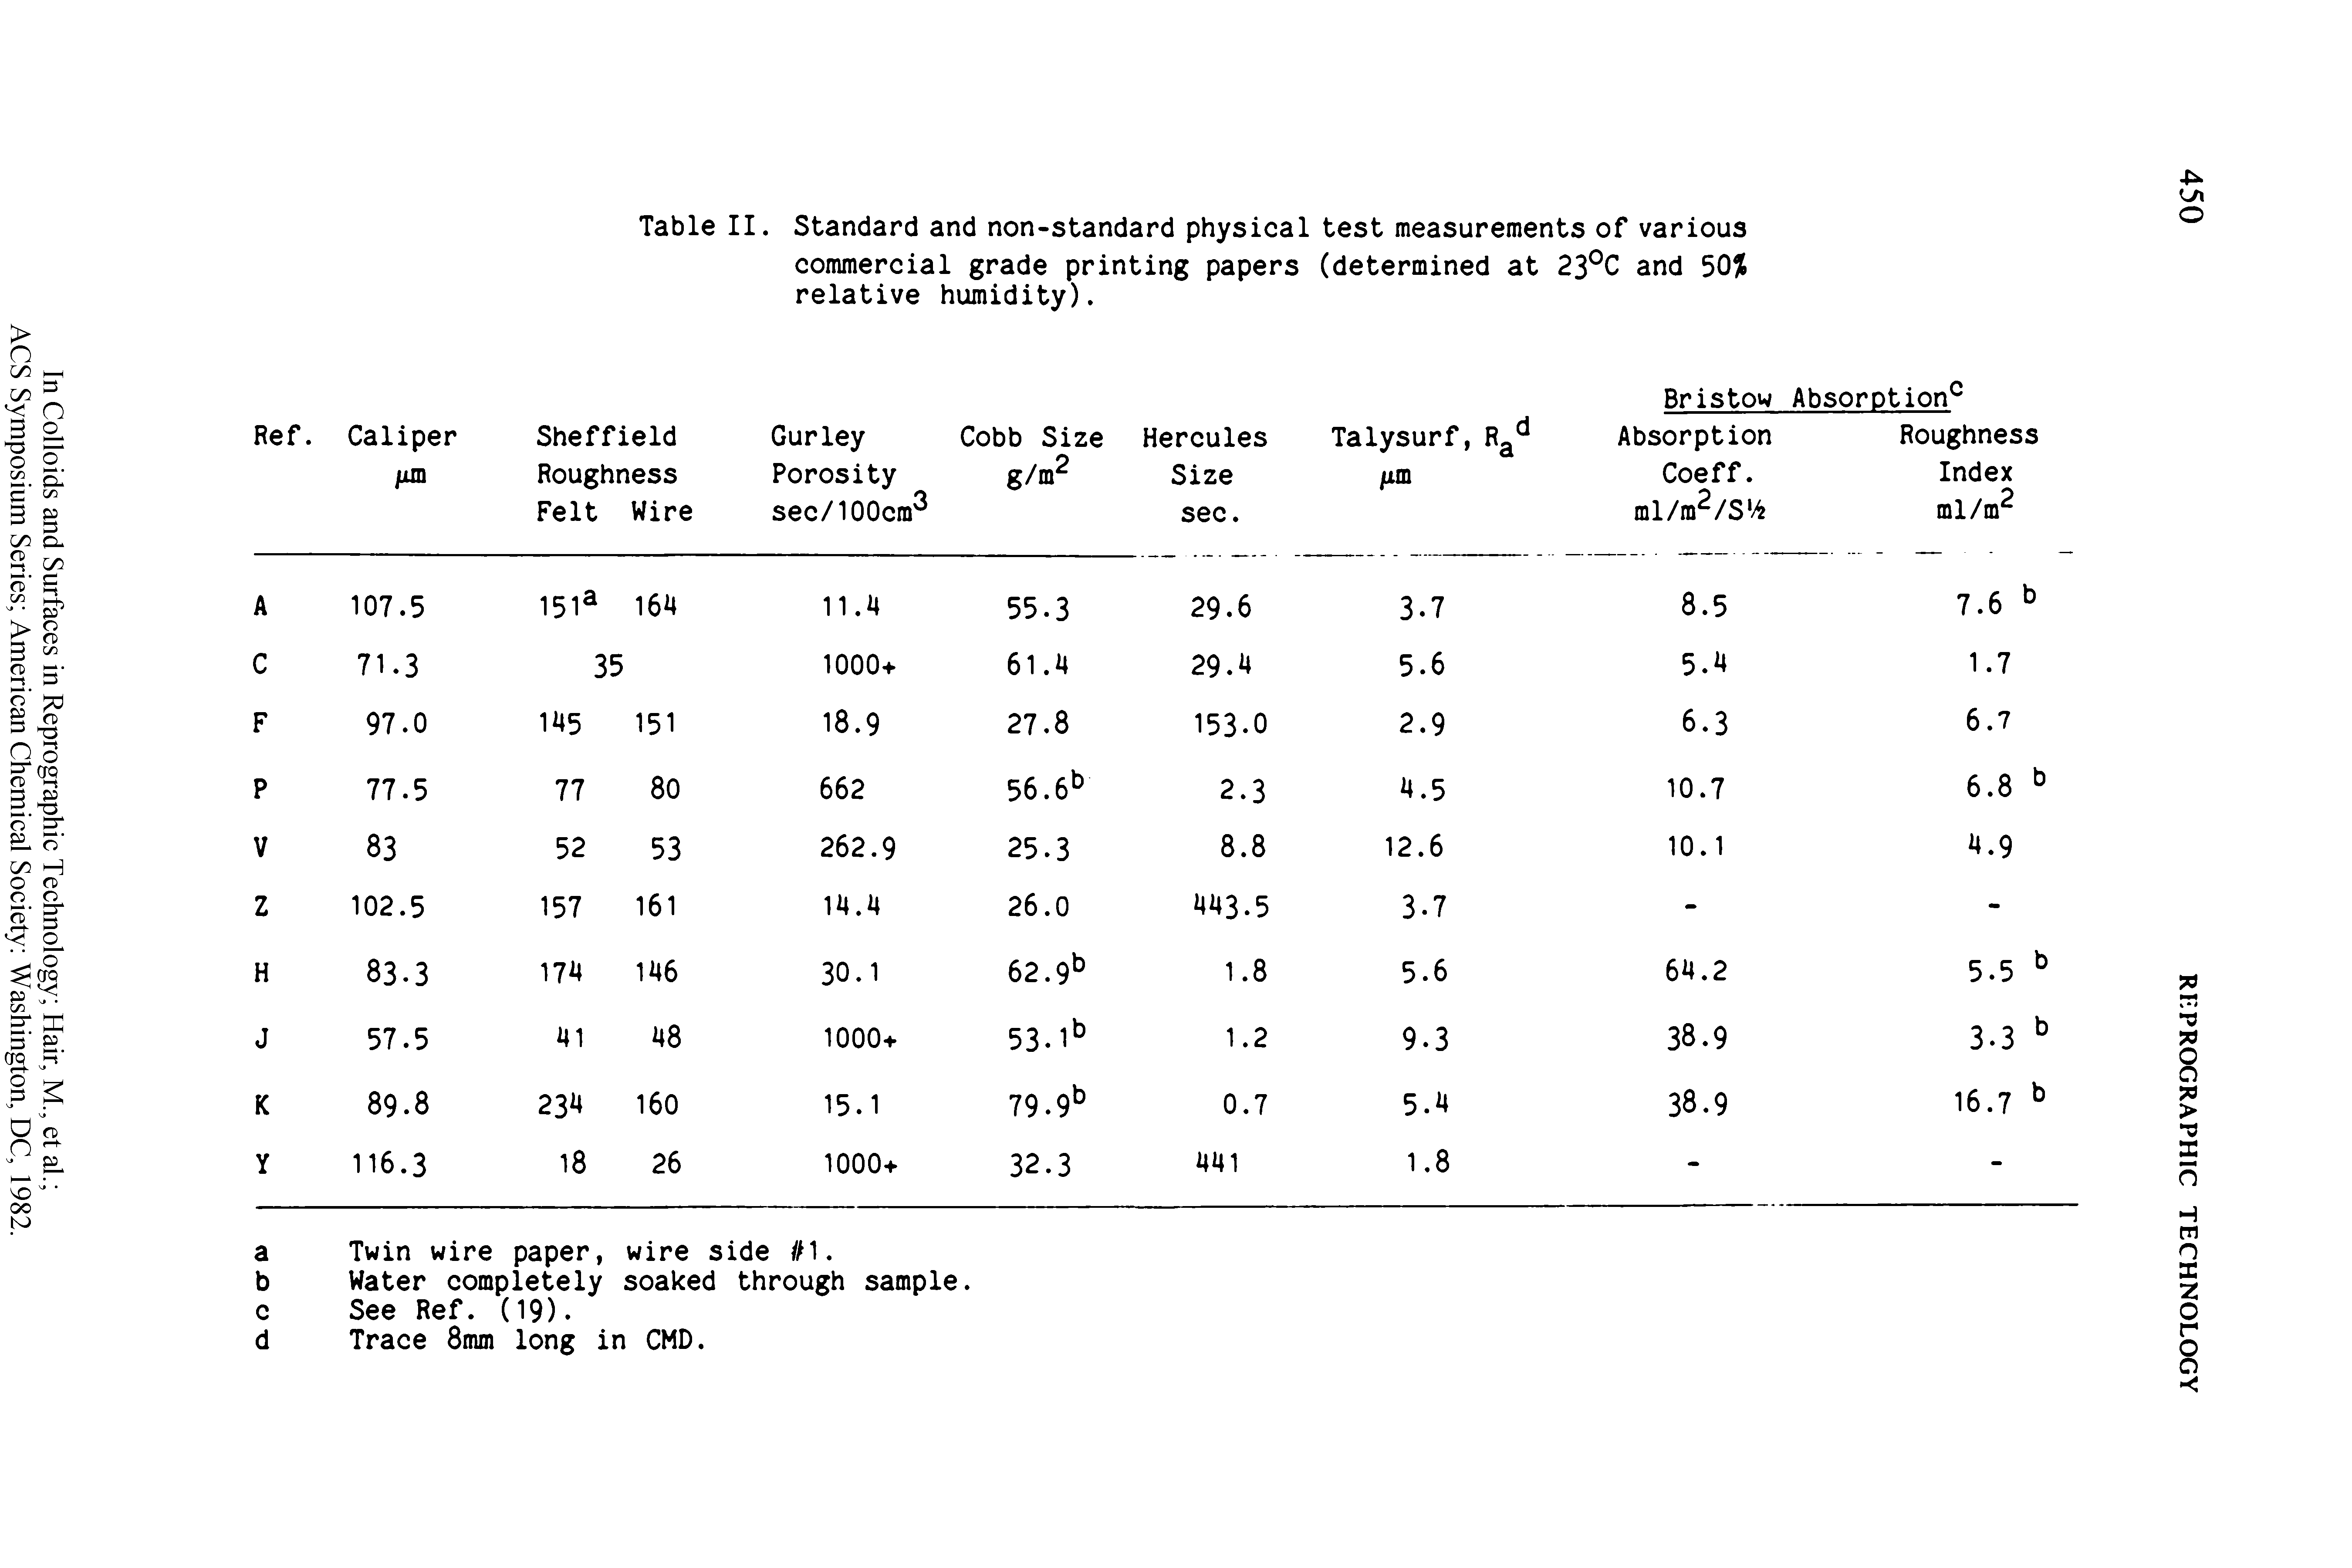 Table II. Standard and non-standard physical test measurements of various commercial grade printing papers (determined at 23°C and 50 relative humidity).